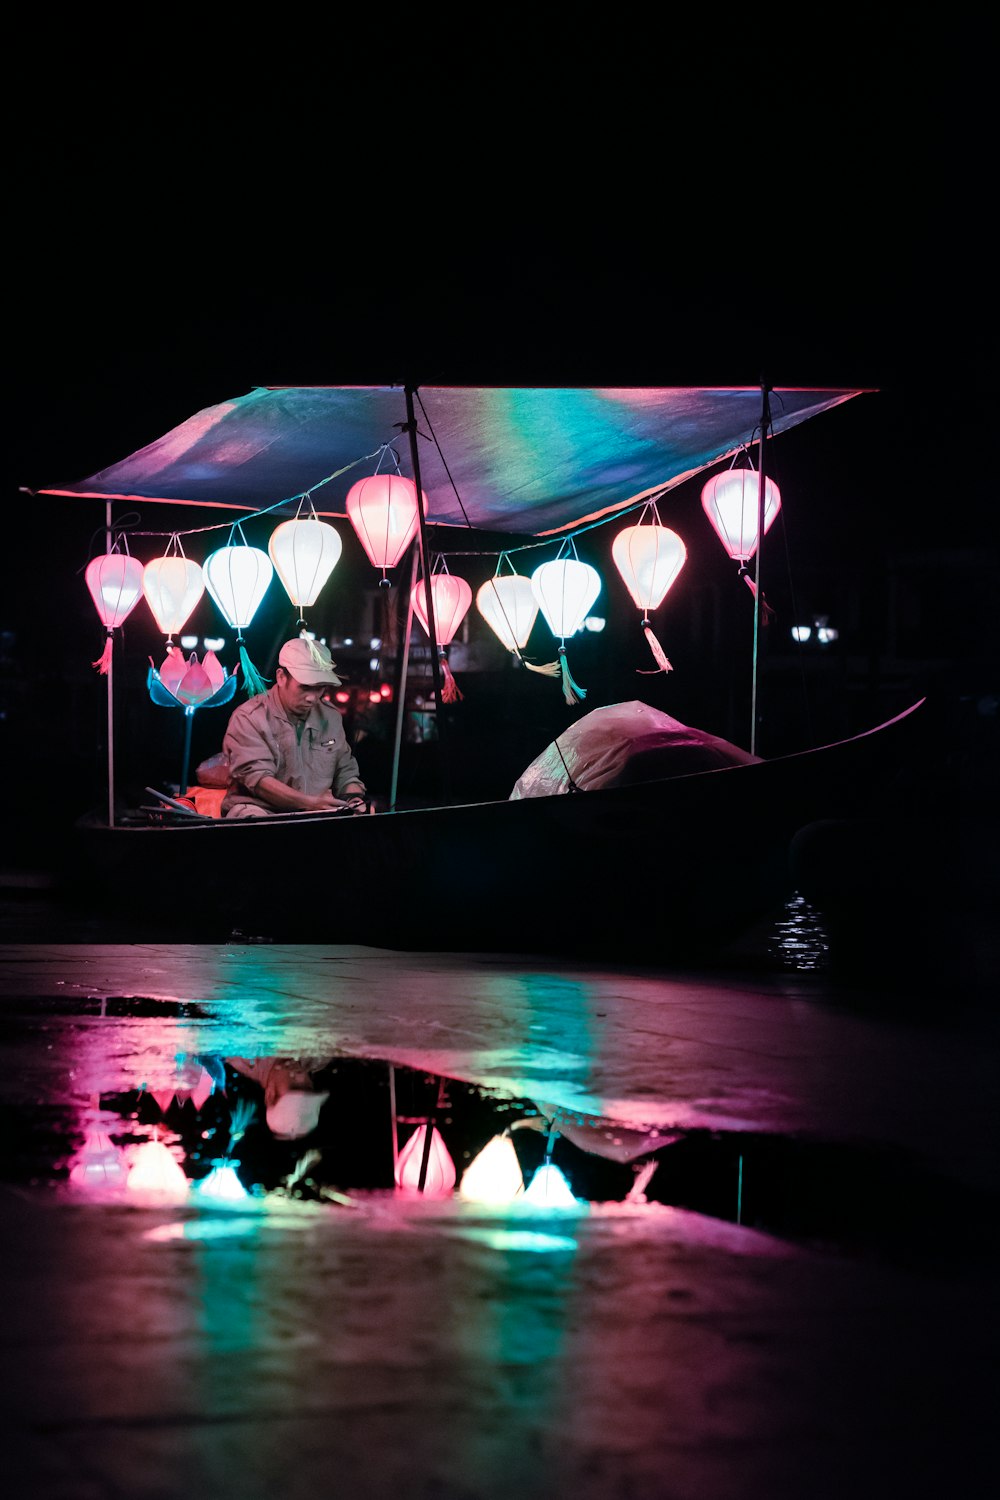 man riding boat with multicolored lanterns at night